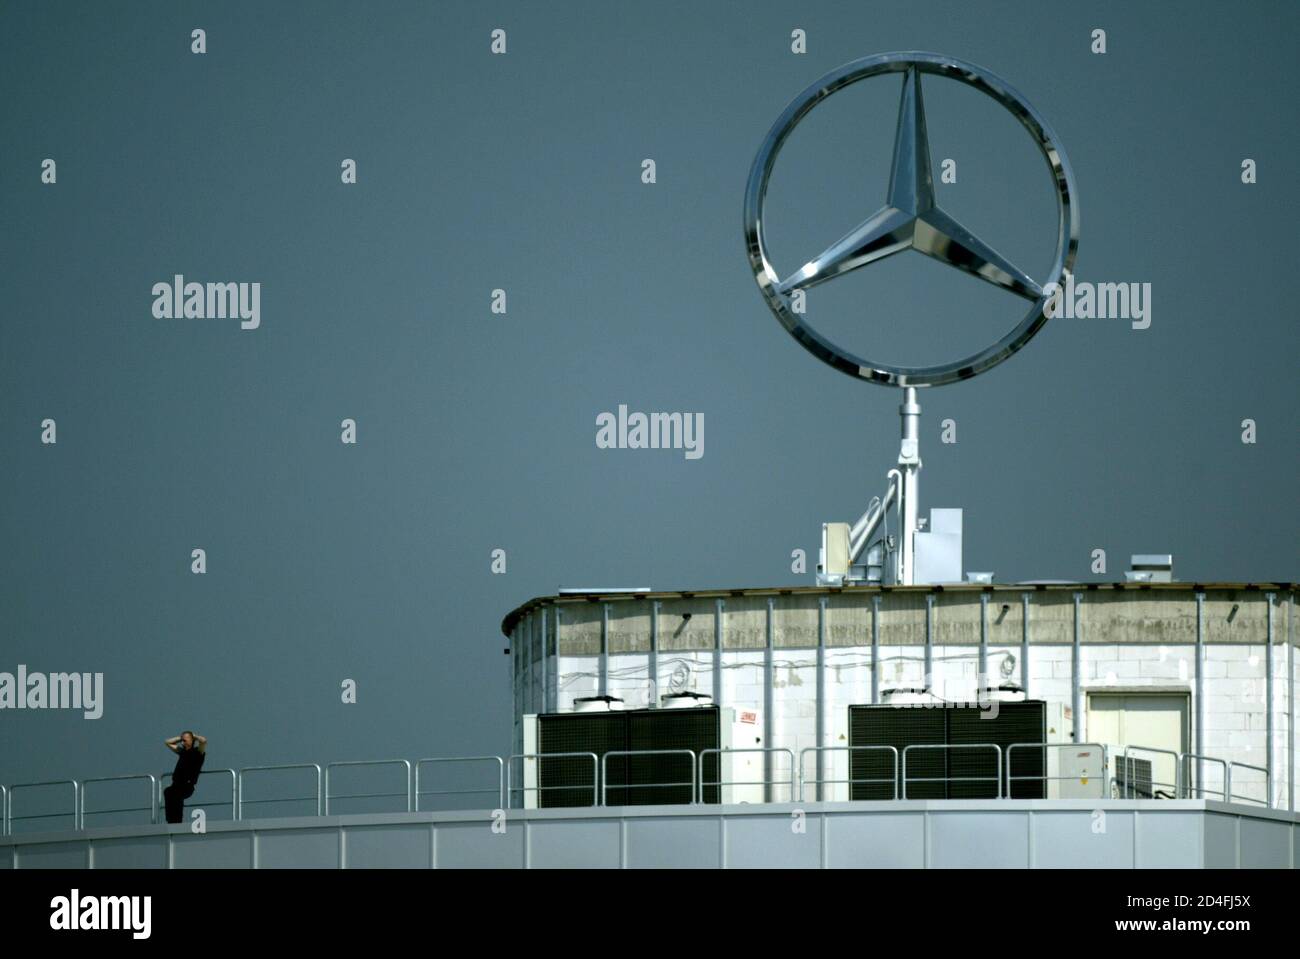 A SPECTATOR SITS UNDER A MERCEDES SYMBOL AS HE WATCHES PRACTICE FOR THE GERMAN GRAND PRIX AT HOCKENHEIM CIRCUIT DURING PRACTICE FOR THE GERMAN GRAND PRIX. Stock Photo